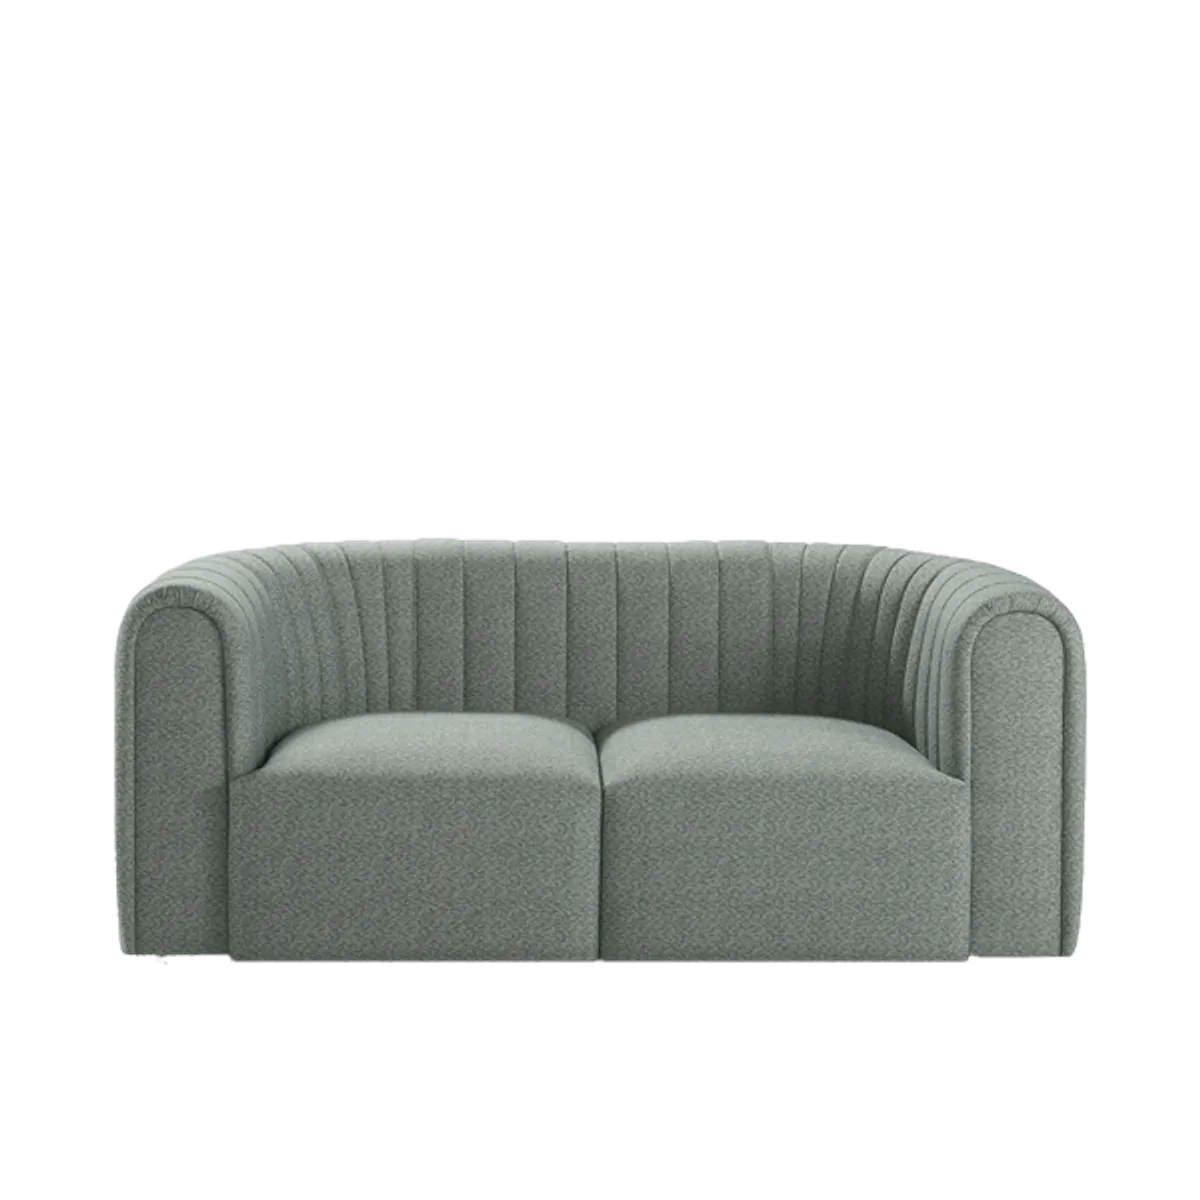 Core small sofa Inside Out Contracts